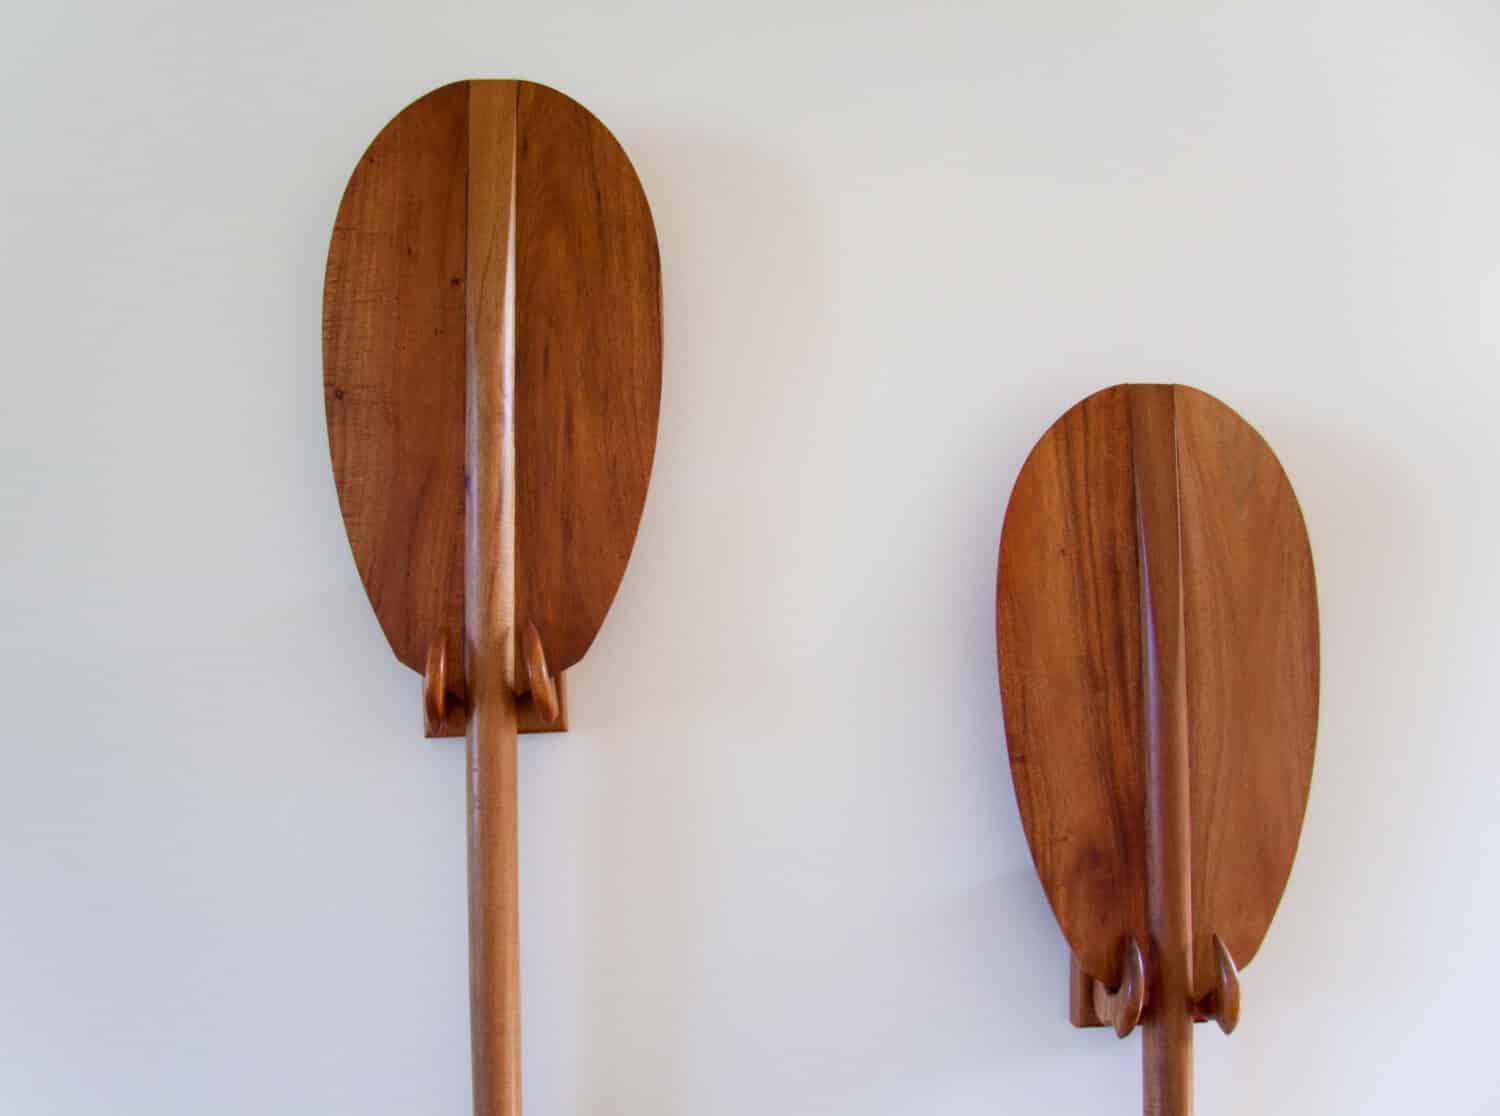 A pair of tradditional hawaiian paddles are used as a house decoration in oahu hawaii.